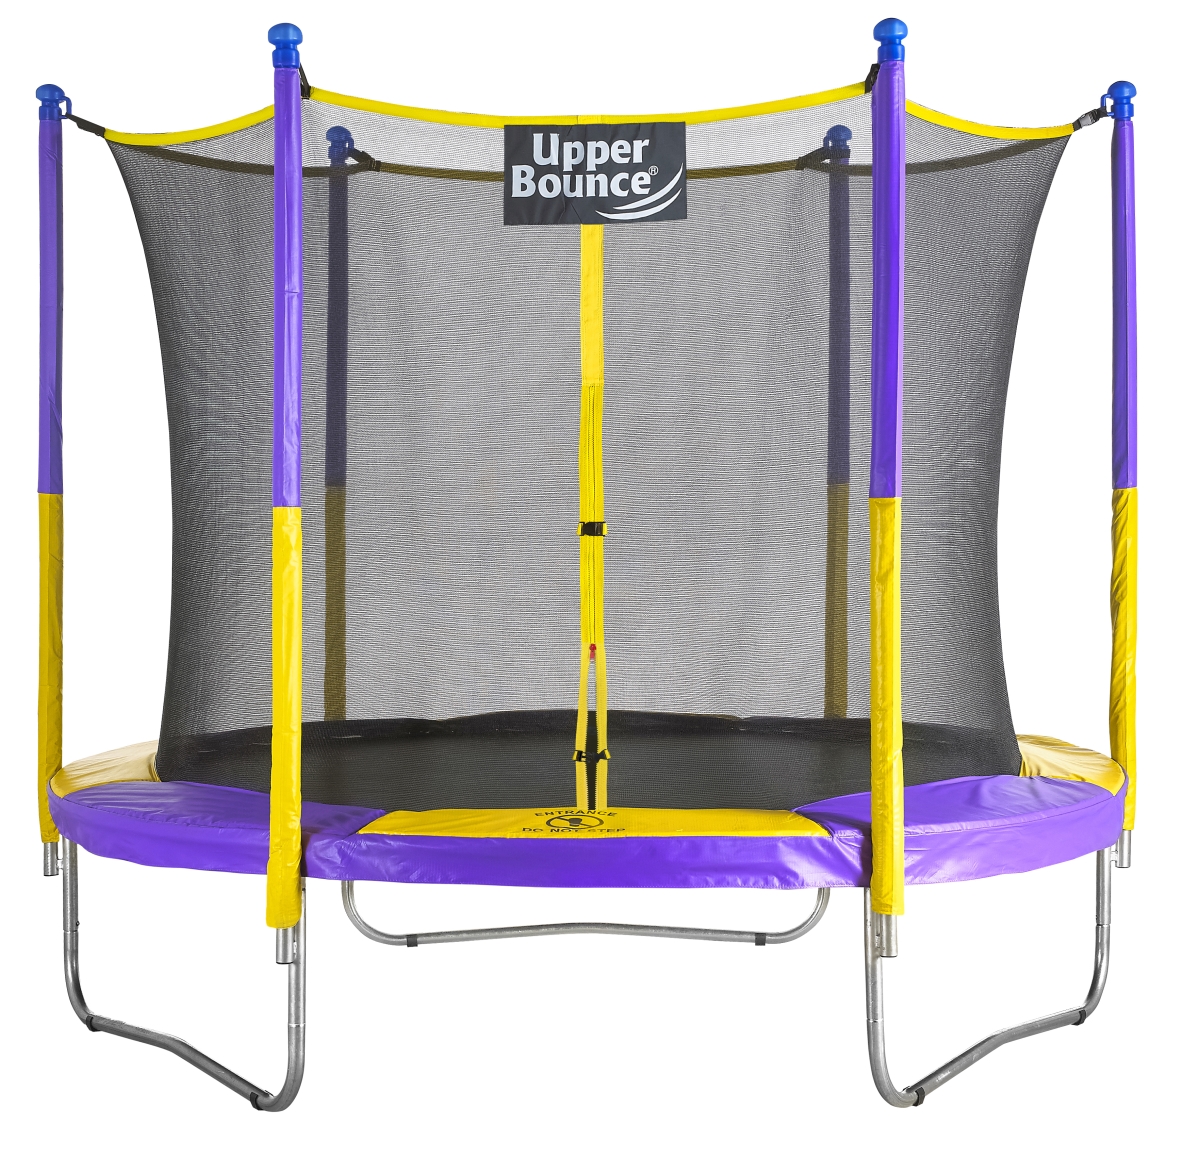 Picture of Upper Bounce UB03EC-09E 9 ft. Upper Bounce Trampoline & Enclosure Set Equipped